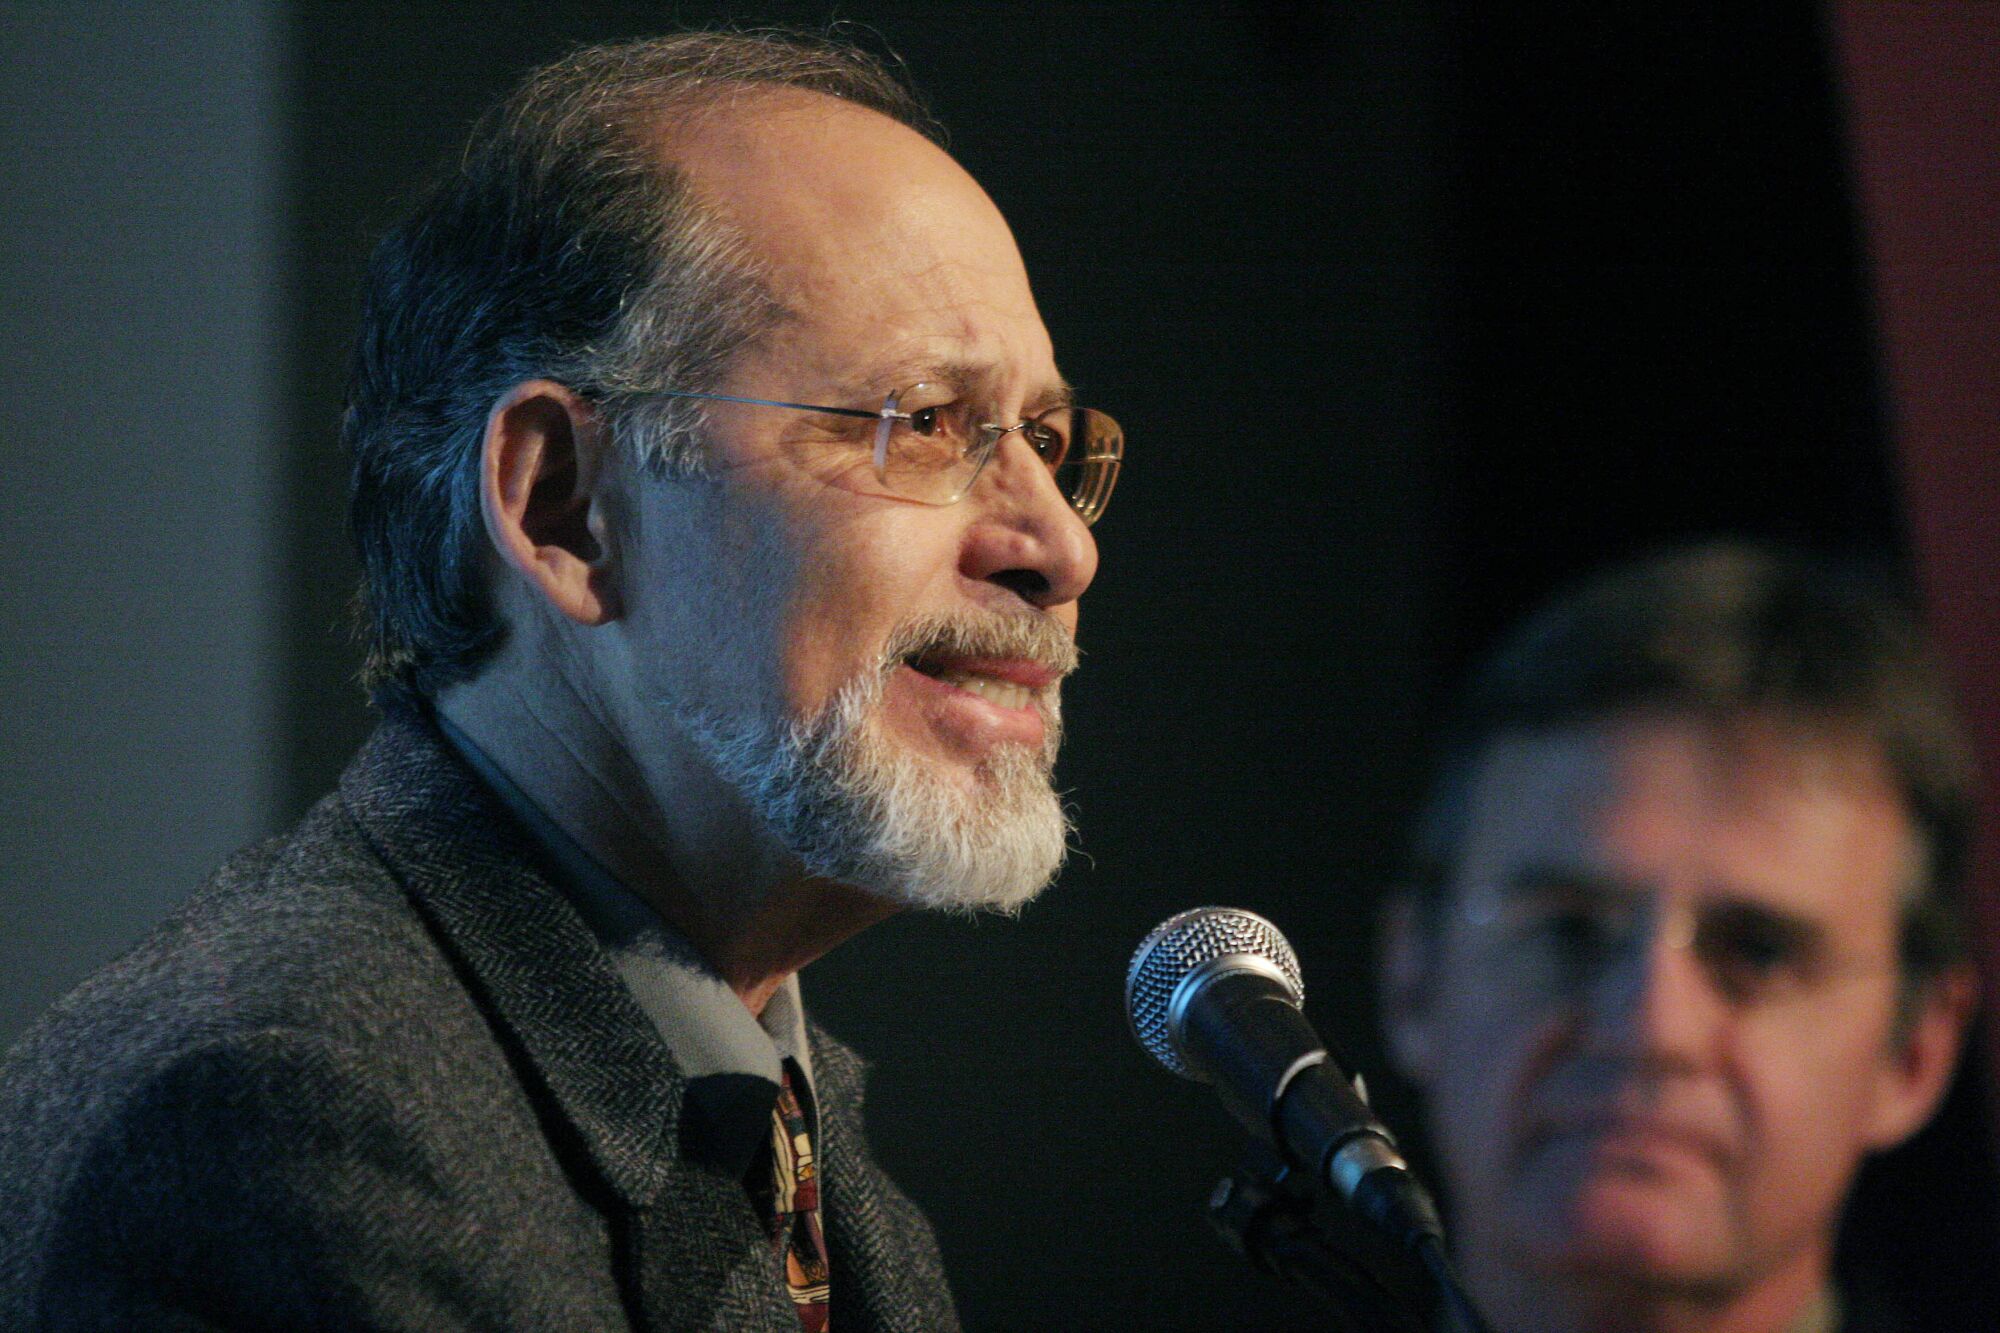 A man speaks into a microphone as another watches him in the background.